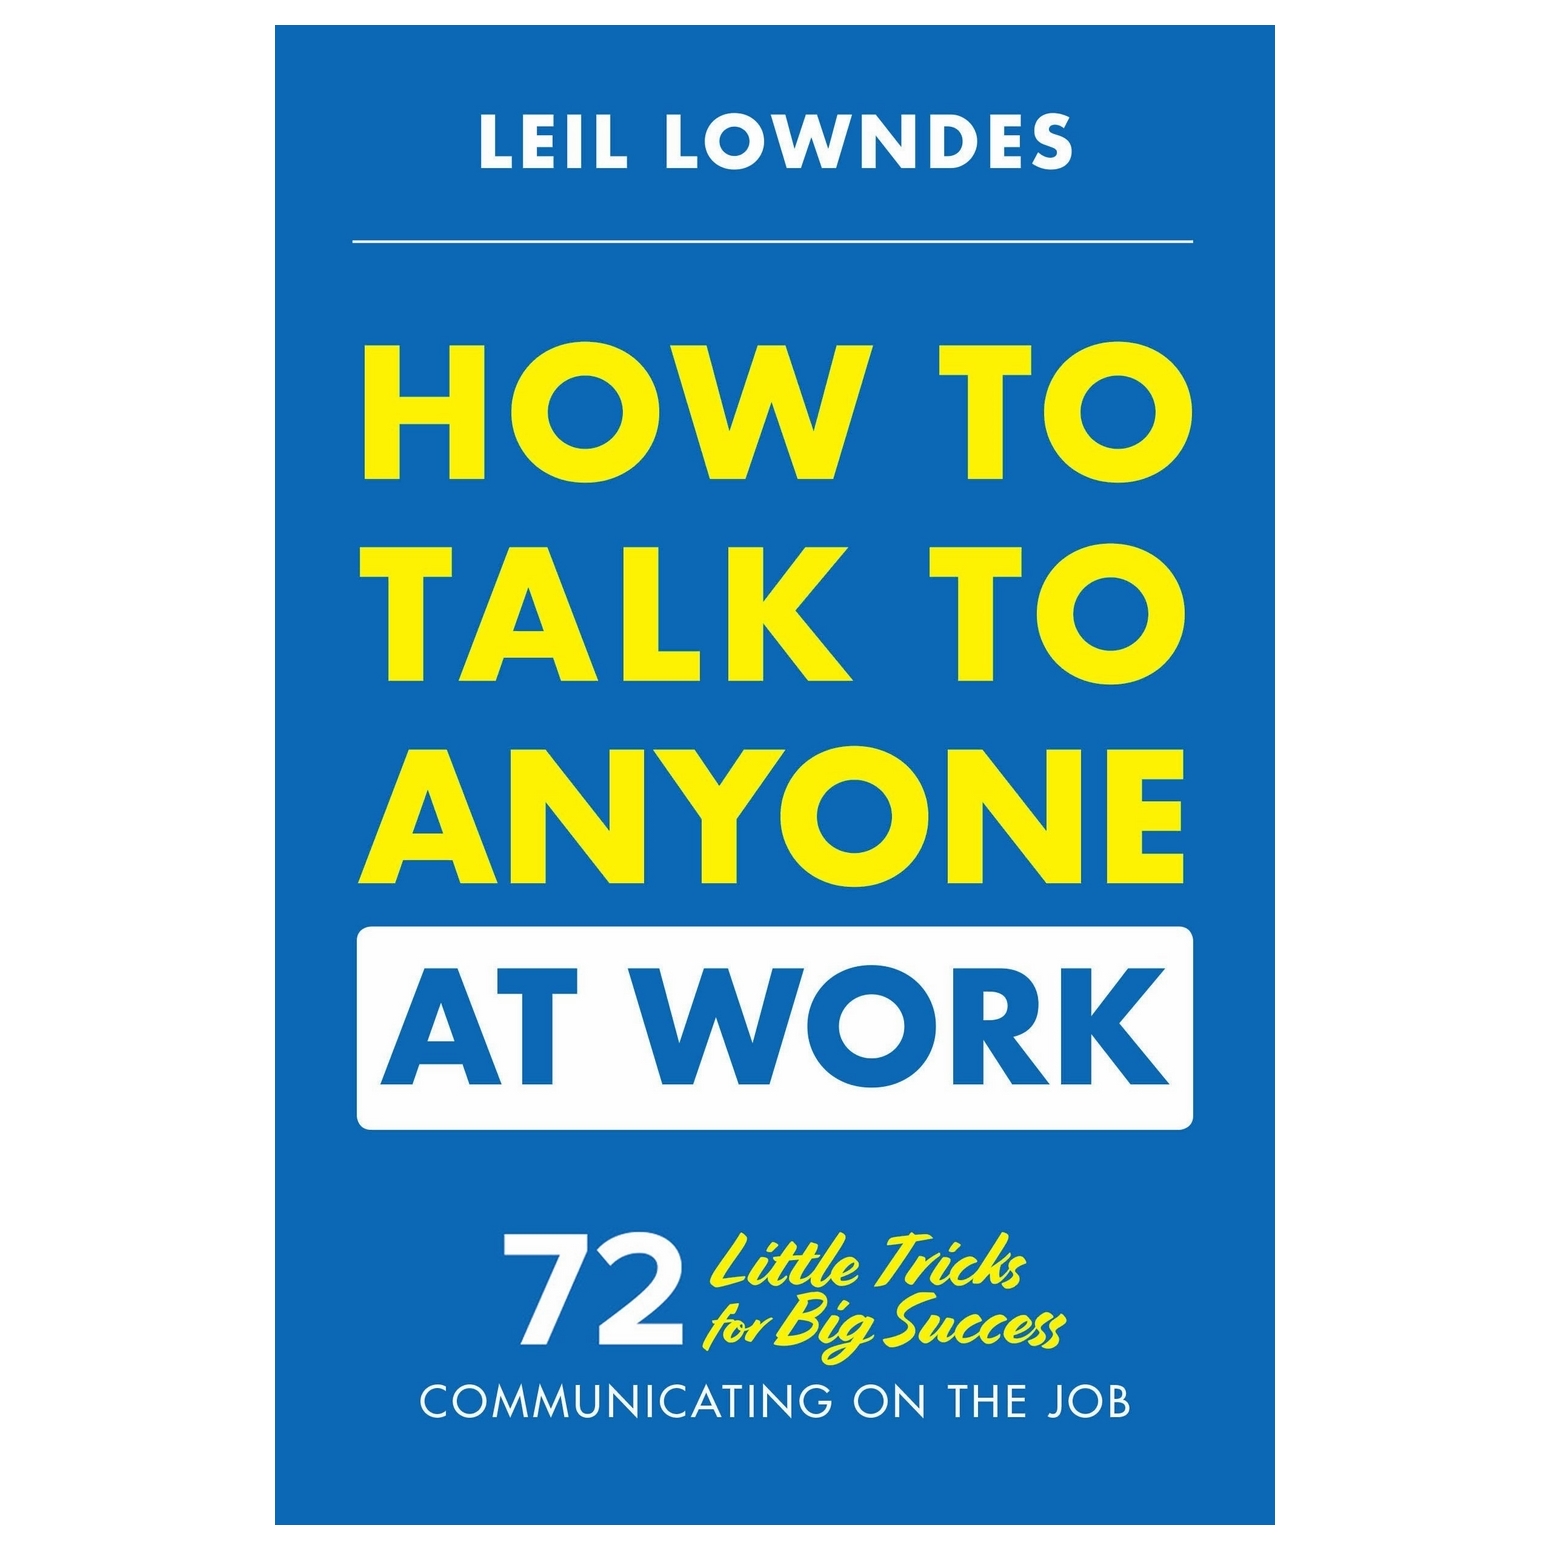 How To Talk To Anyone At Work: 72 Little Tricks For Big Success In Business Relationships